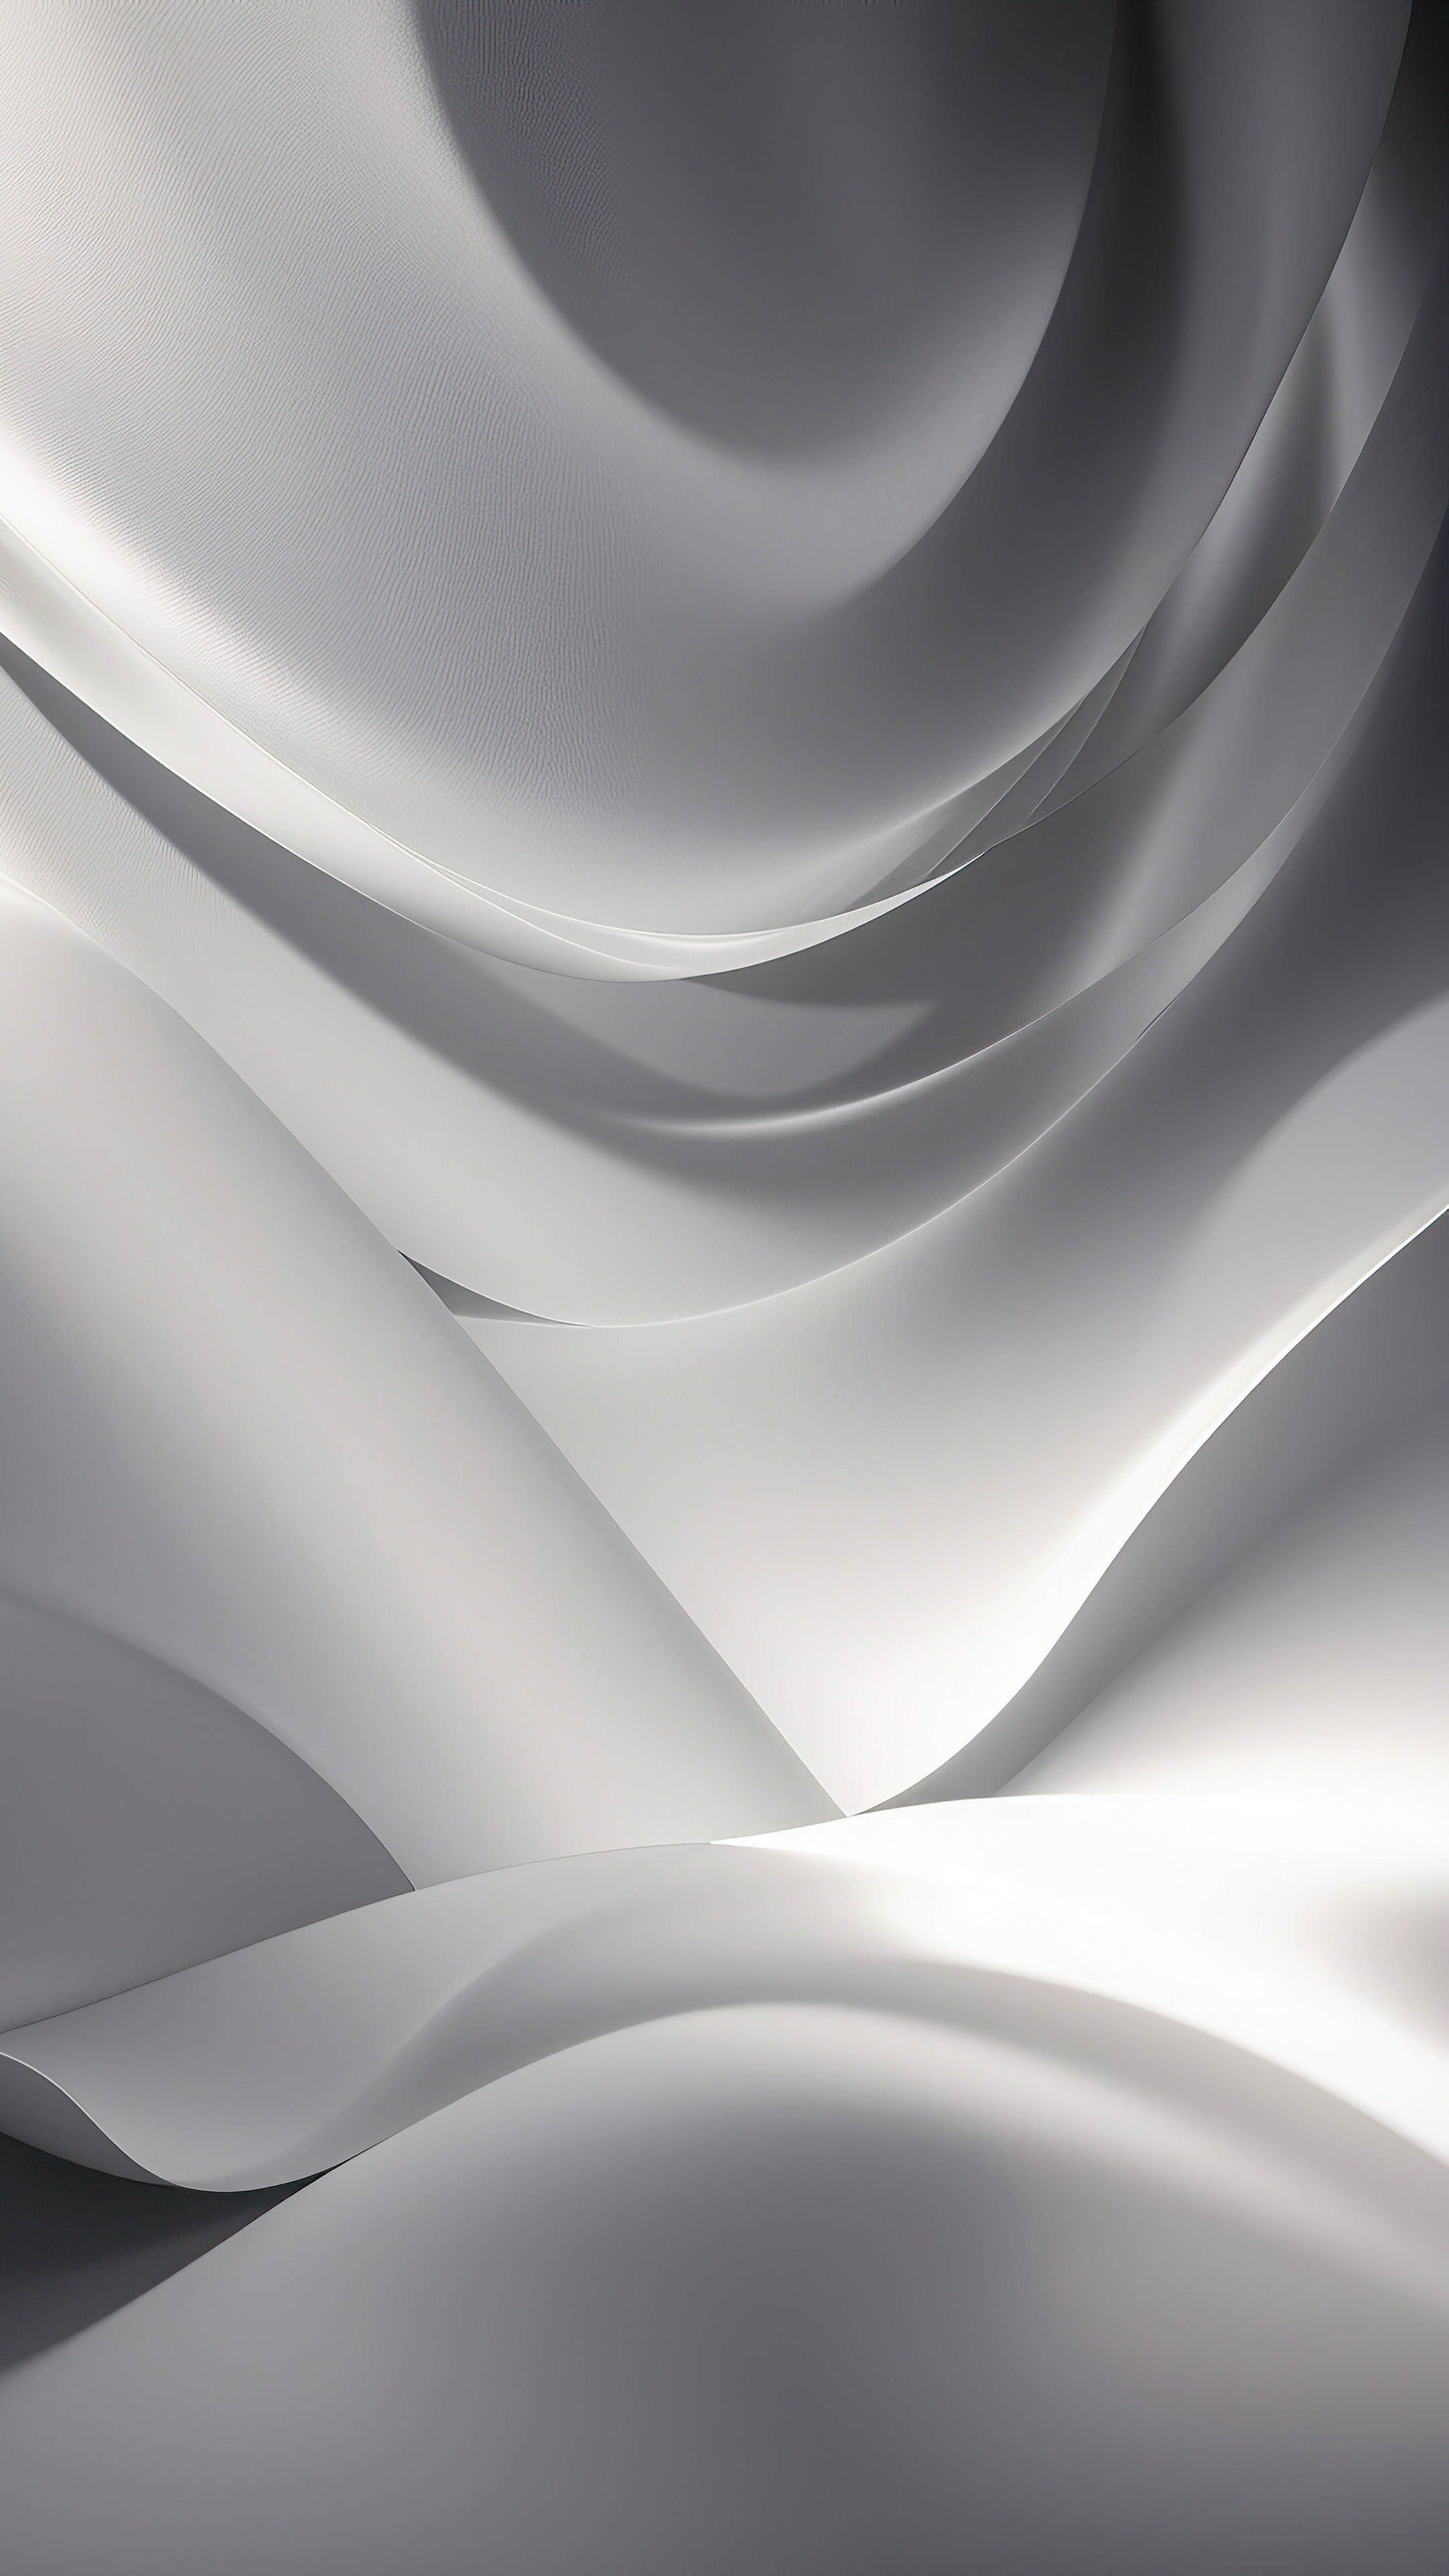 Transform your iPhone screen with an abstract wallpaper, revealing an interplay of light and shadow for a mesmerizing effect.